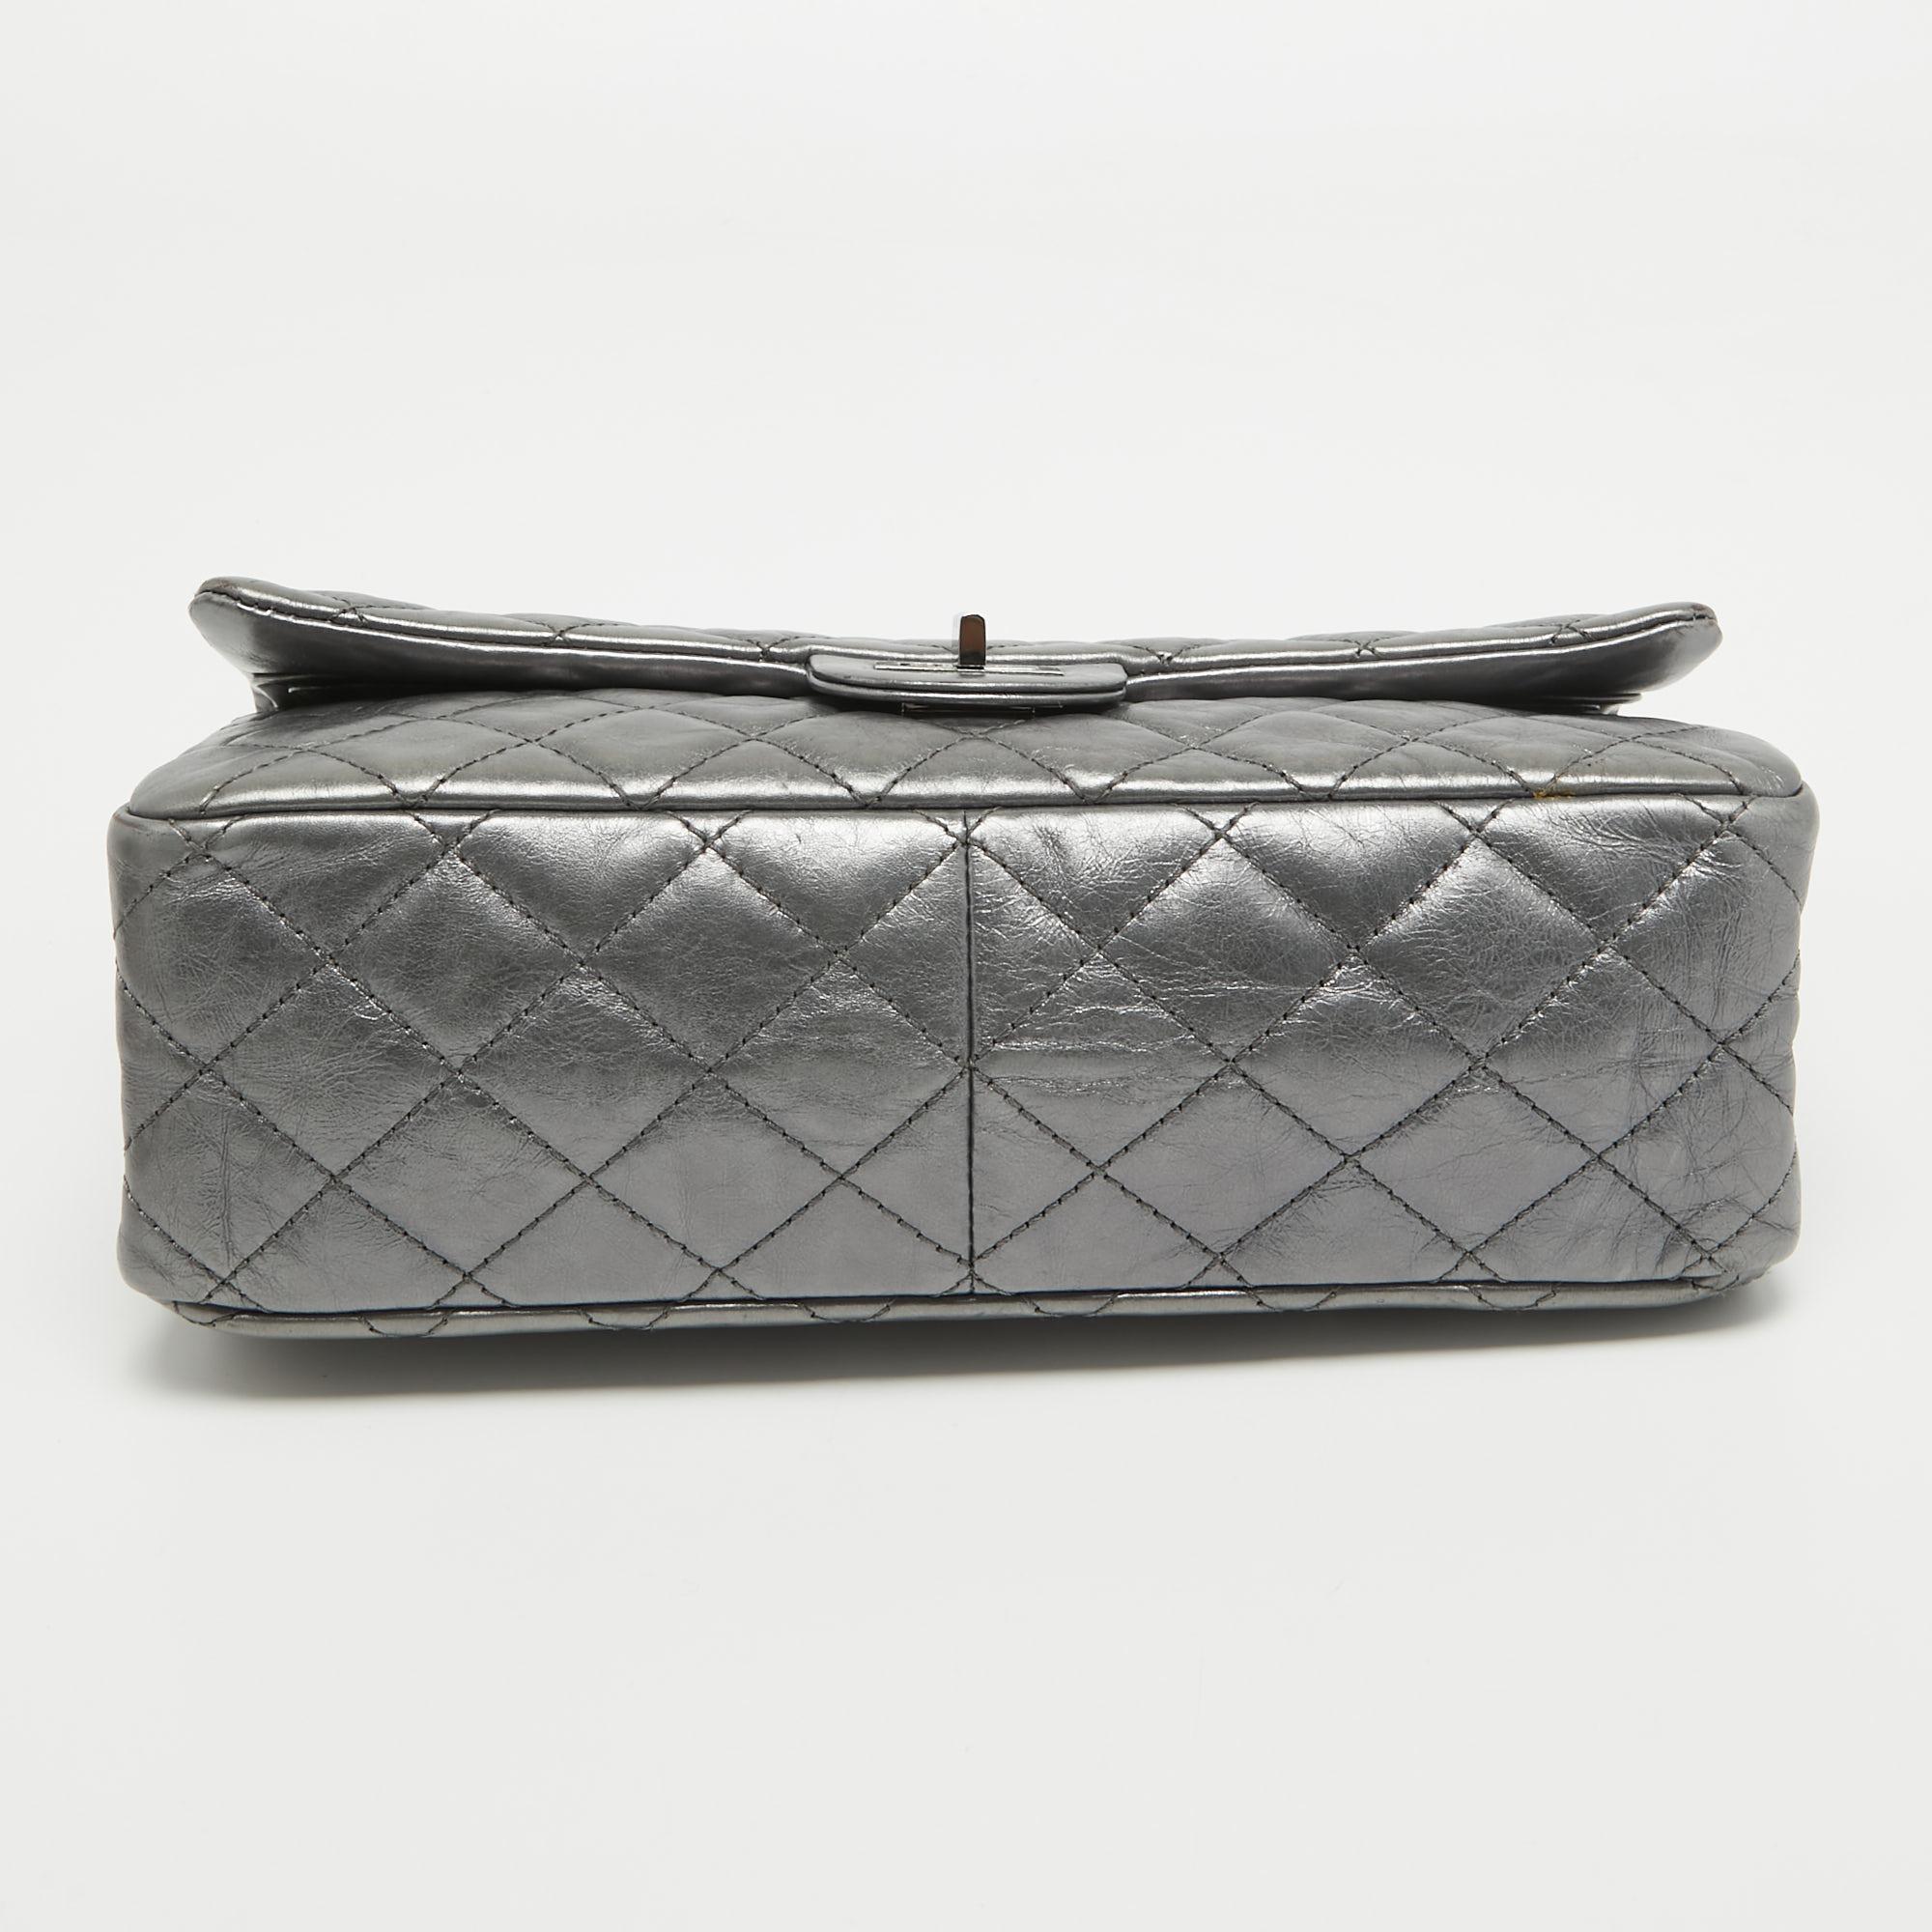 Chanel Metallic Grey Quilted Leather 226 Reissue 2.55 Flap Bag For Sale 9